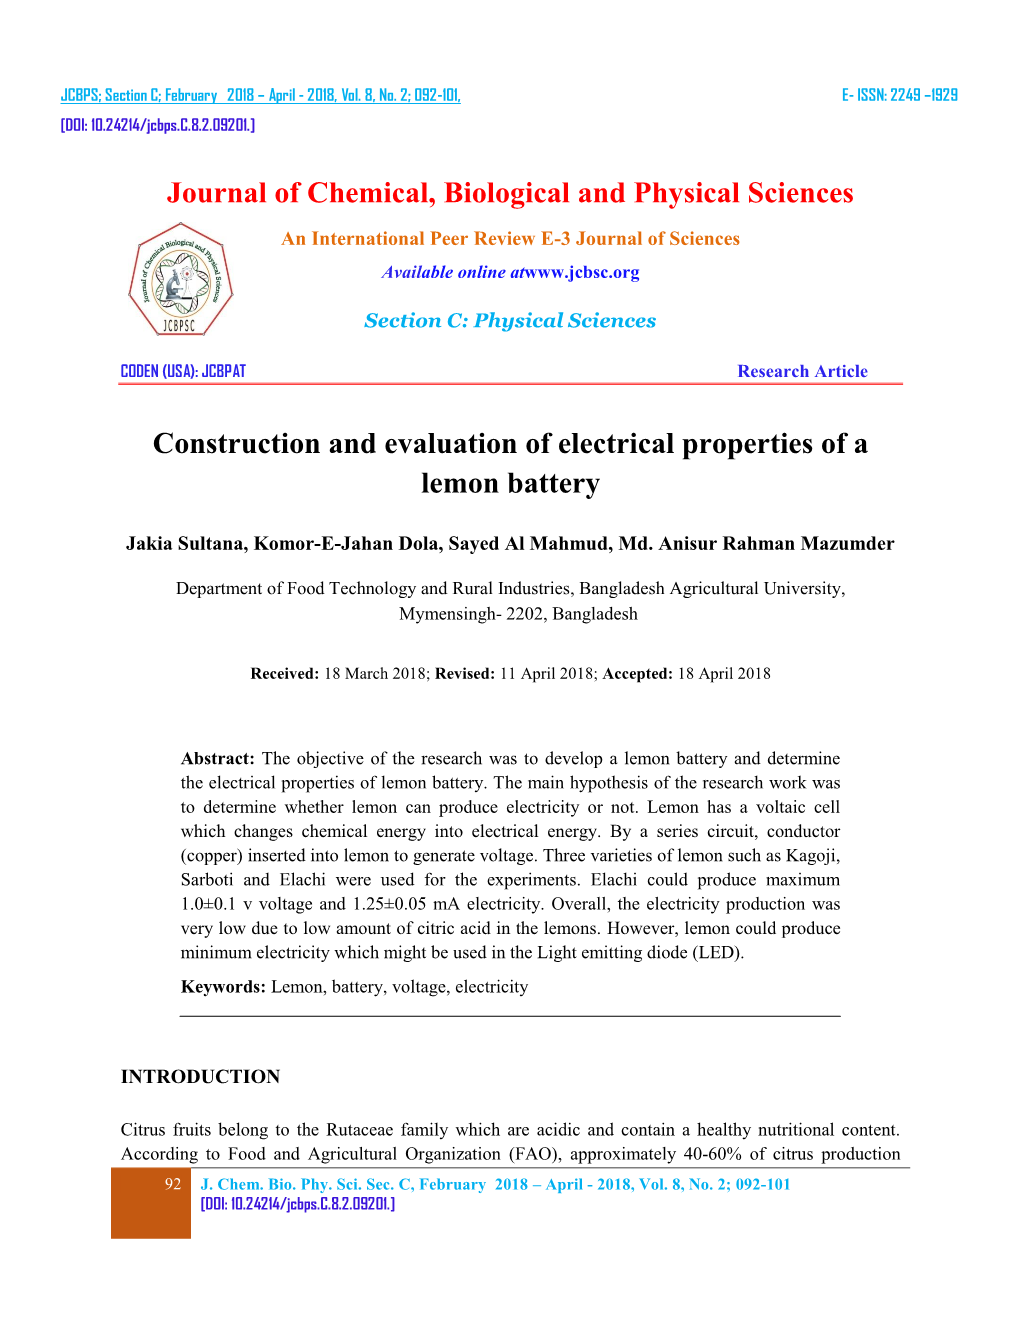 Construction and Evaluation of Electrical Properties of a Lemon Battery